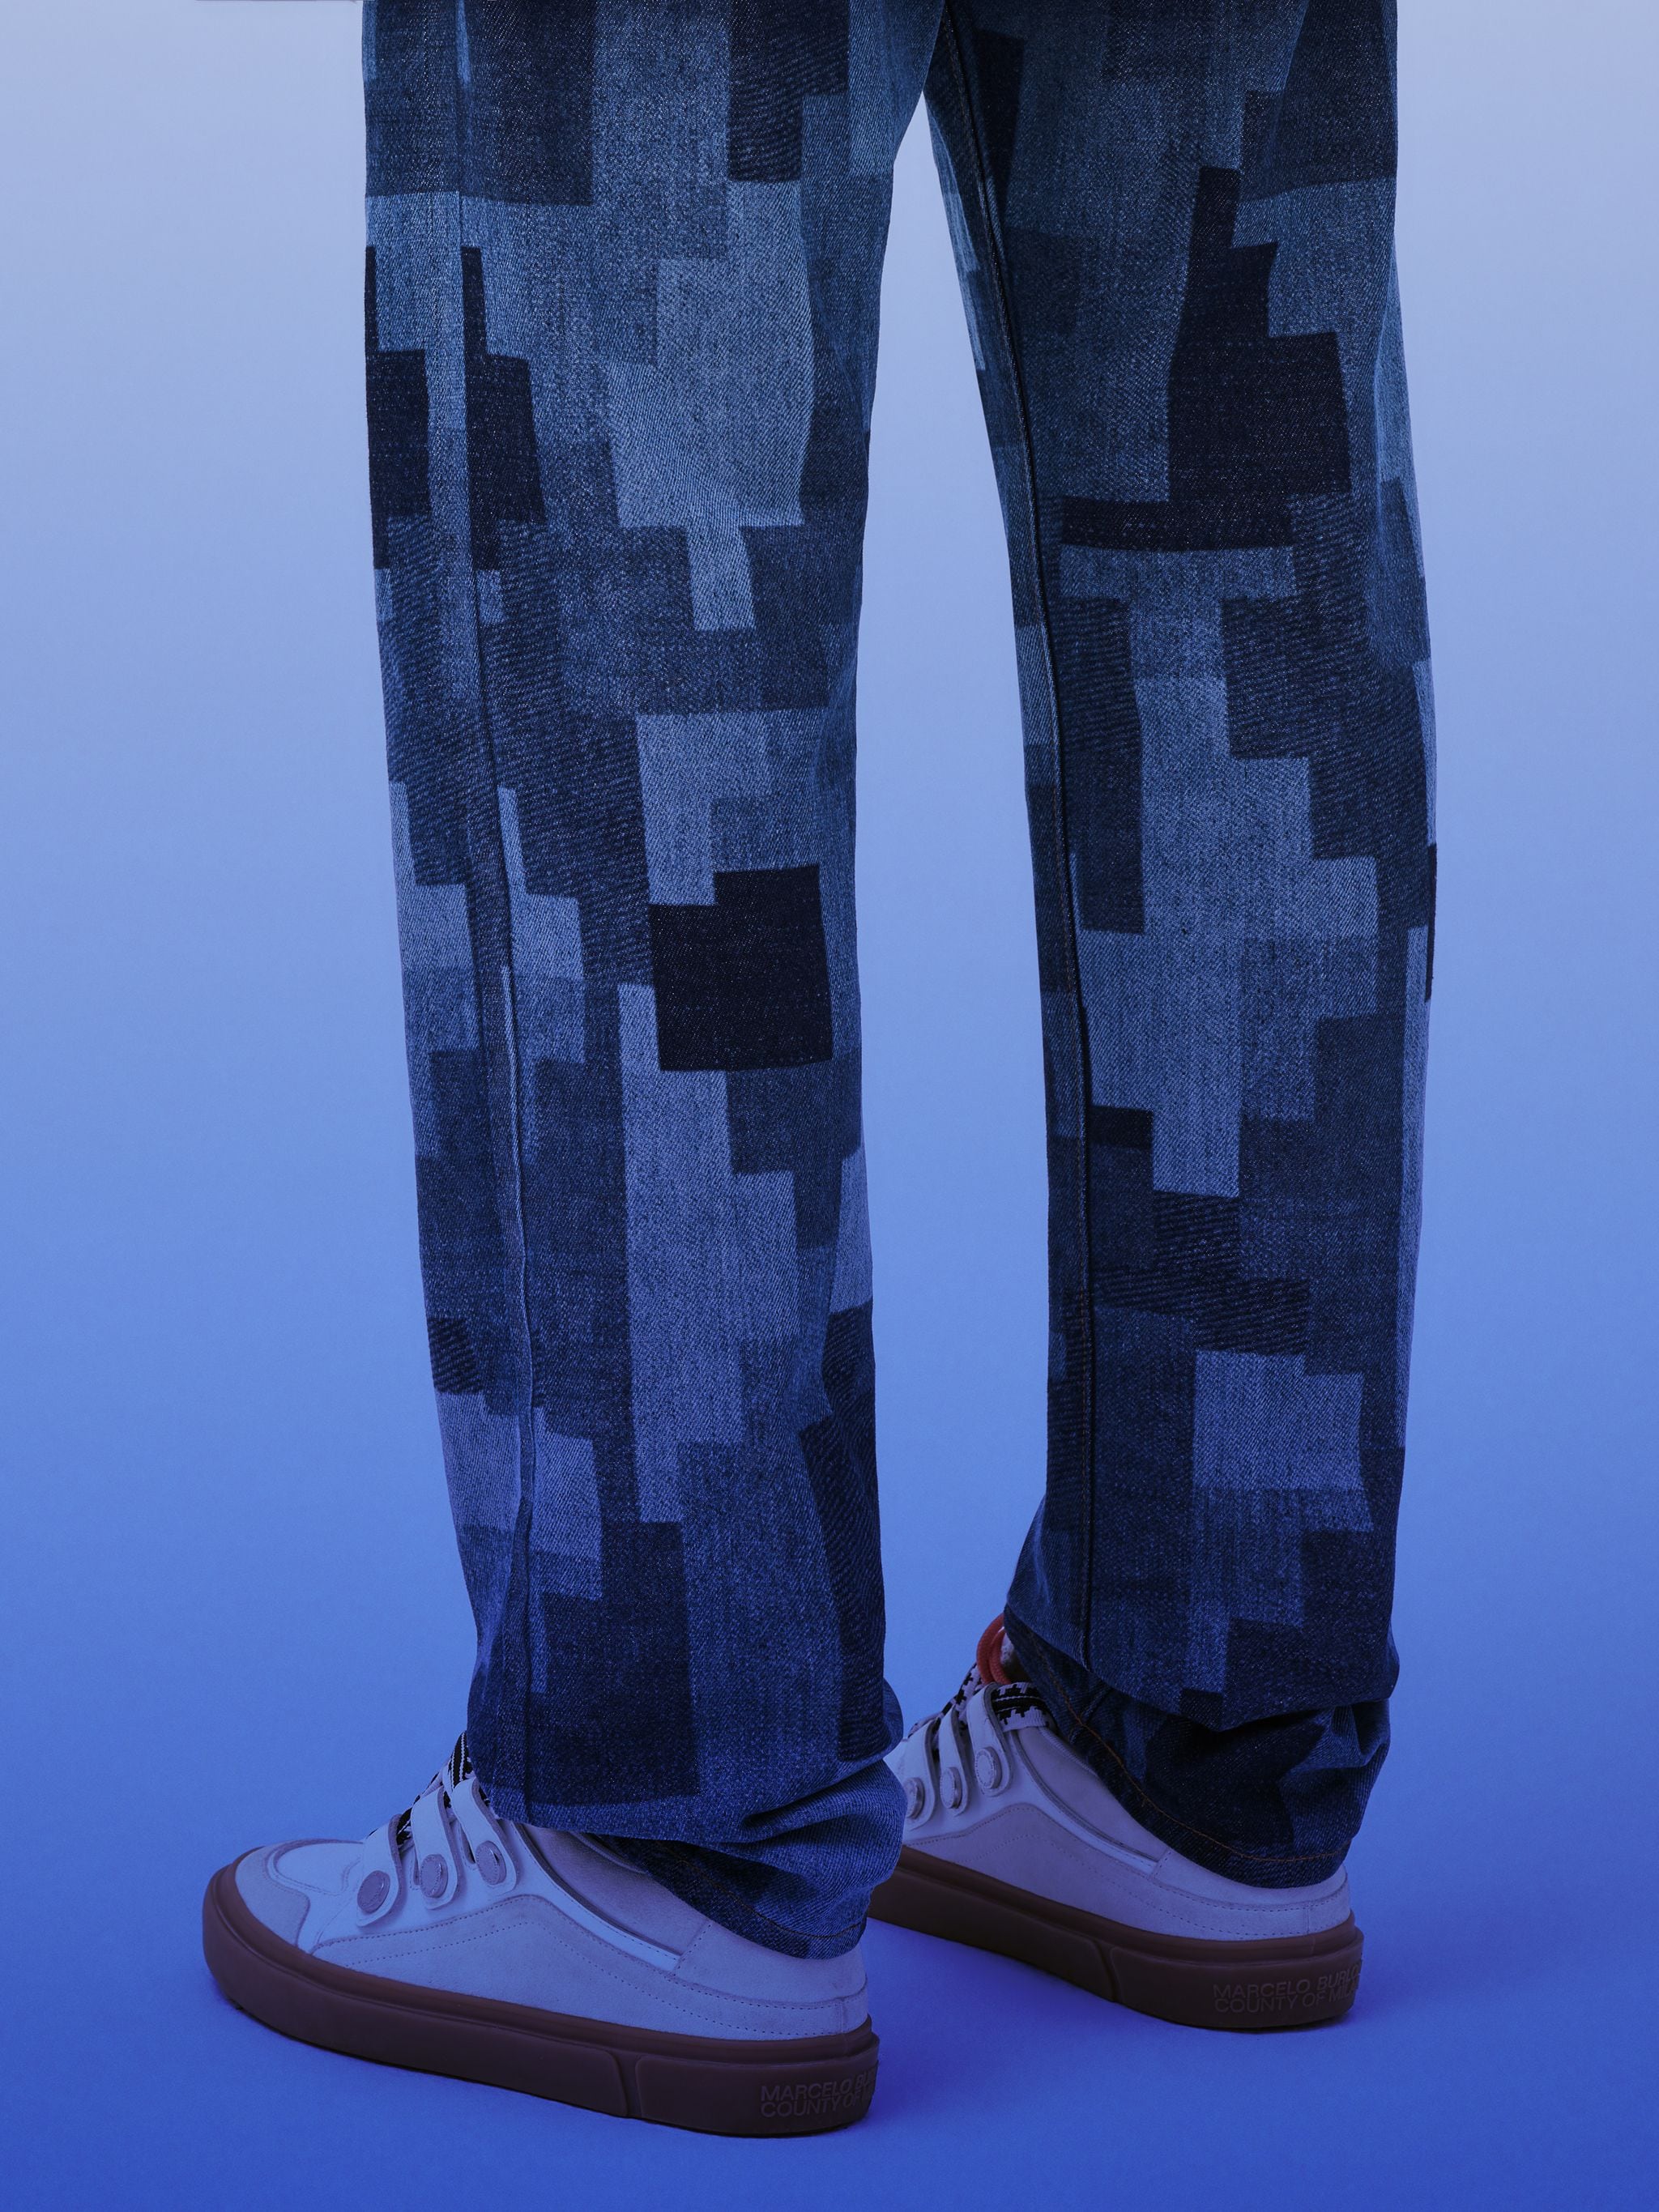 x Levi's logo-print straight-leg jeans from Marcelo Burlon County of Milan featuring navy blue, cotton, denim, all-over logo print, faded effect, contrast stitching, mid-rise, belt loops, concealed fly and button fastening, classic five pockets, logo patch to the rear and straight leg.